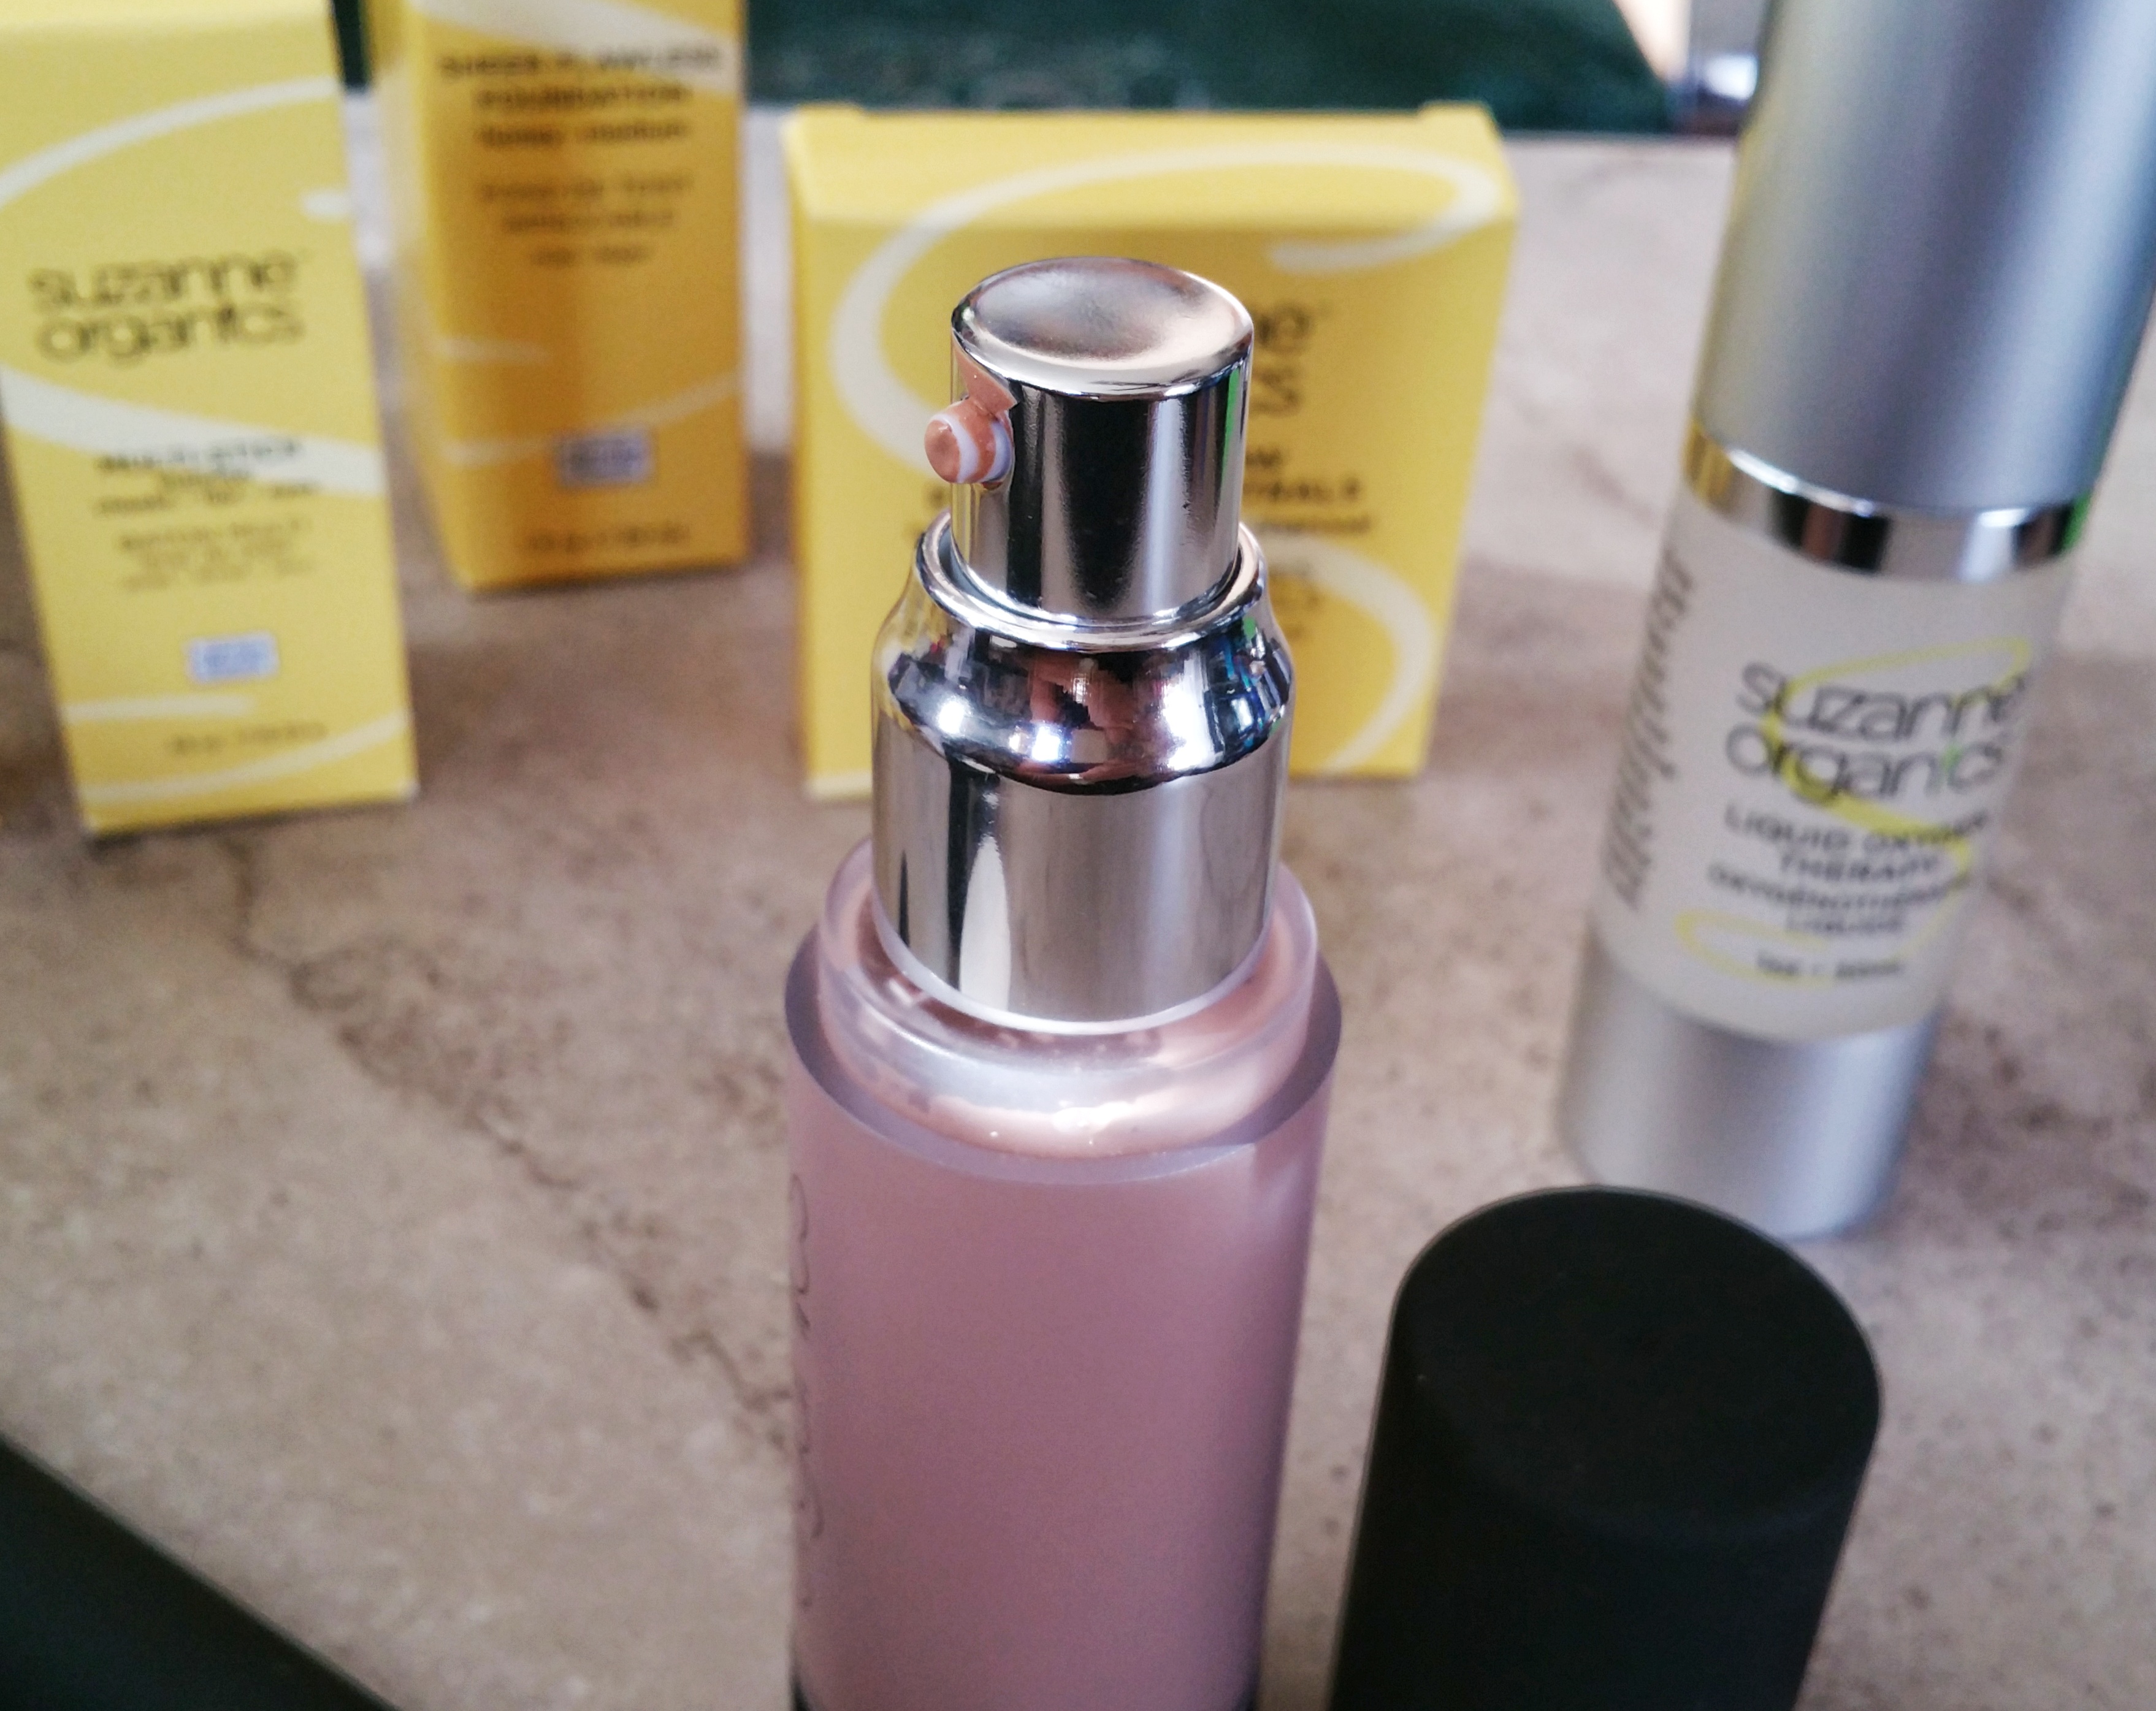 natural makeup, suzanne somers, suzanne somers cosmetics, suzanne organics, natural cosmetics, all natural cosmetics, makeup review, skin care, beauty, makeup, all natural makeup, suzanne somers, cancer, swatches, makeup swatches,